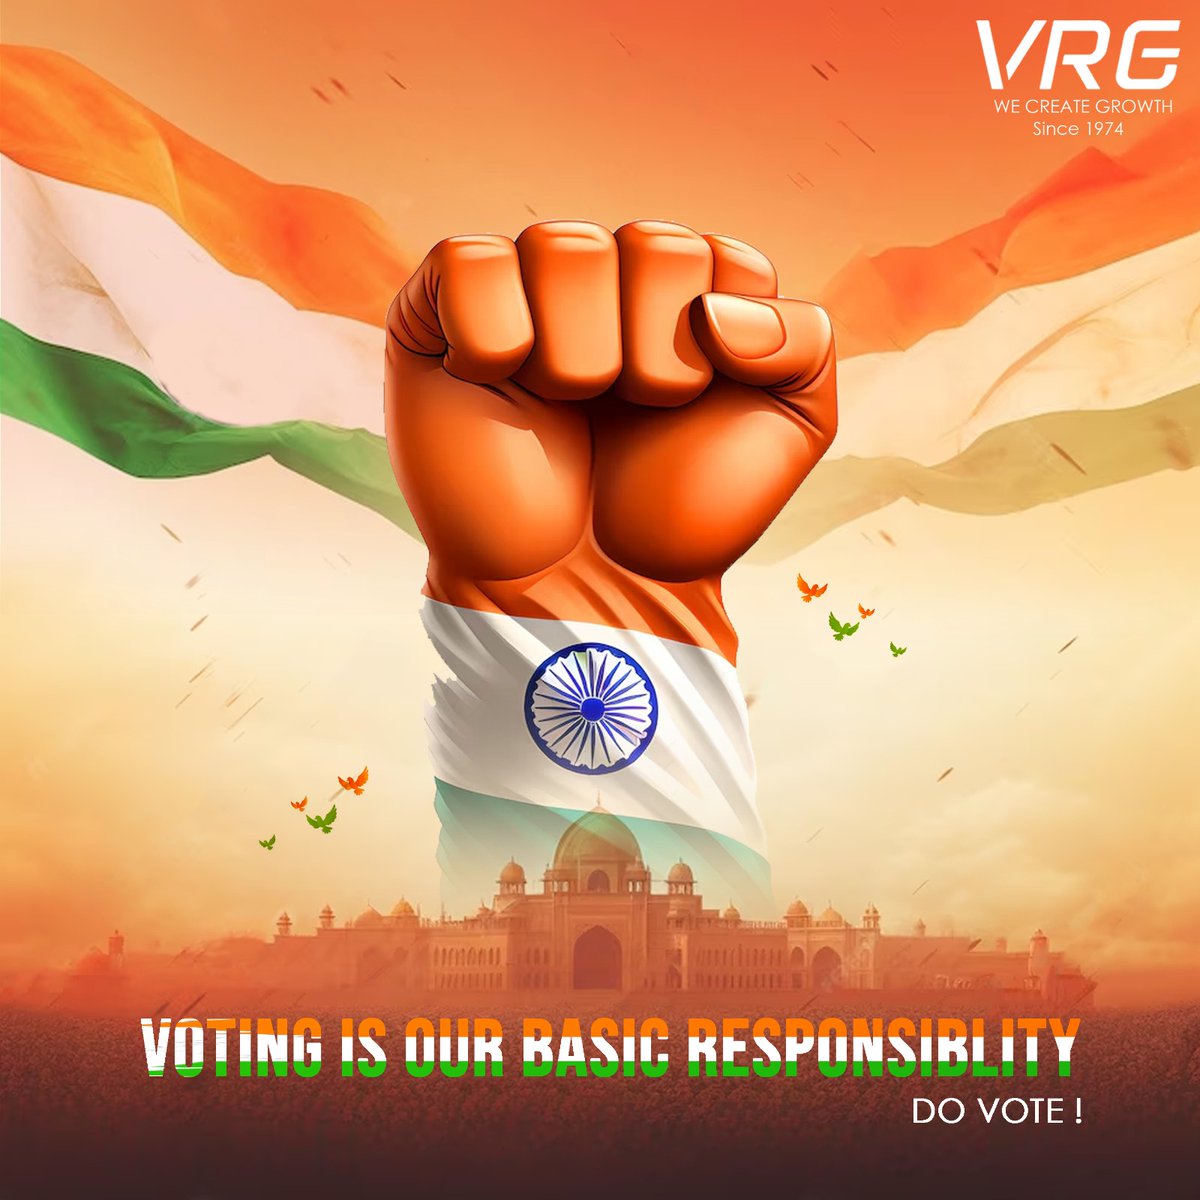 Make no mistake, fellow citizens, voting is not just a mere obligation but a fundamental responsibility that falls upon our shoulders. It is imperative that each and every one of us exercise our right to vote.

#Rasappanandco #vrggroup #vrgconcrete #karur #buildingmaterial